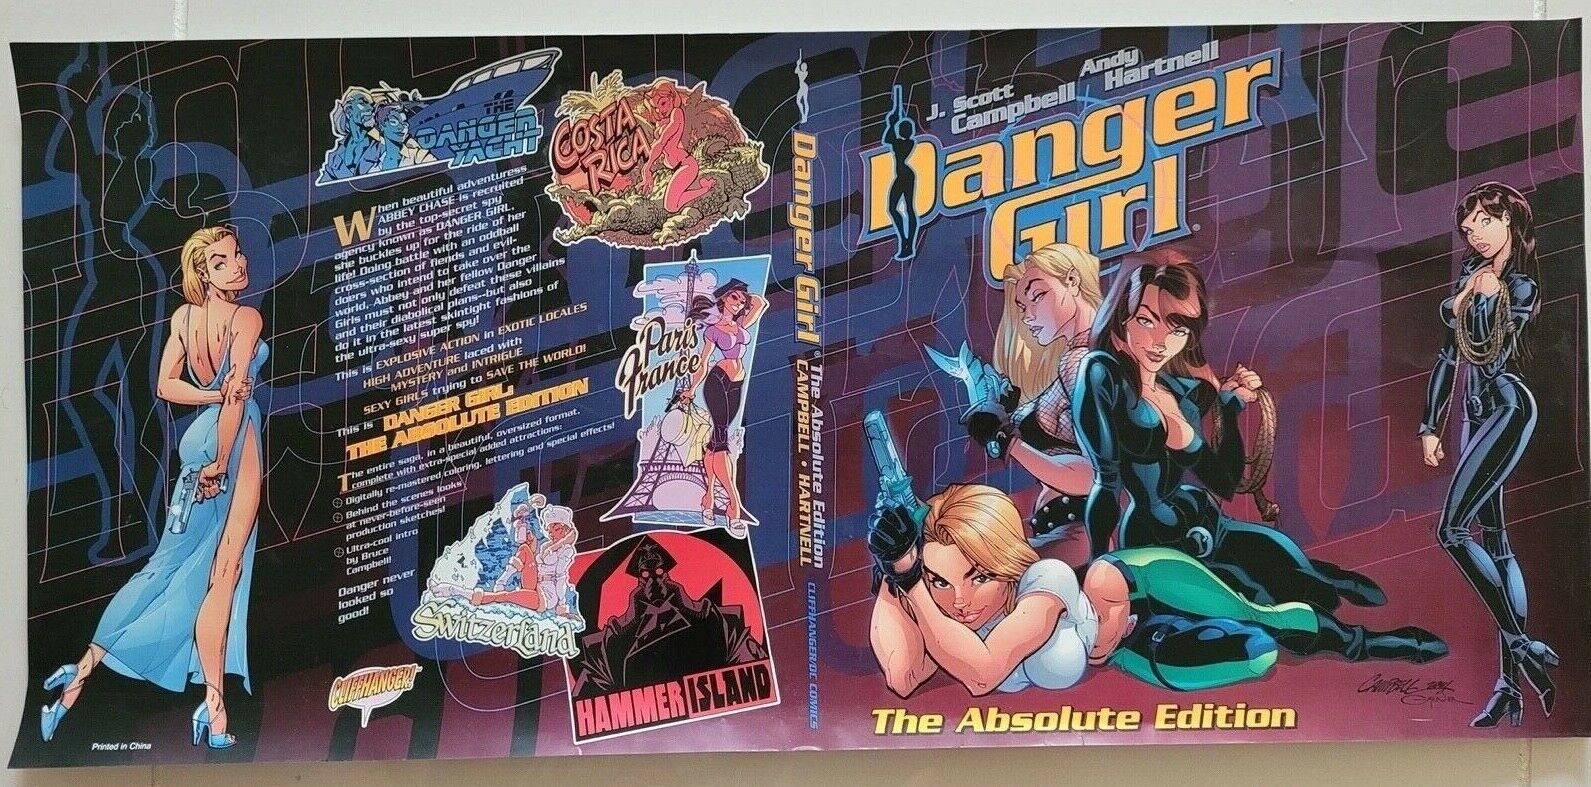 DANGER GIRL THE ABSOLUTE EDITION UNUSED BOOK POSTER 27